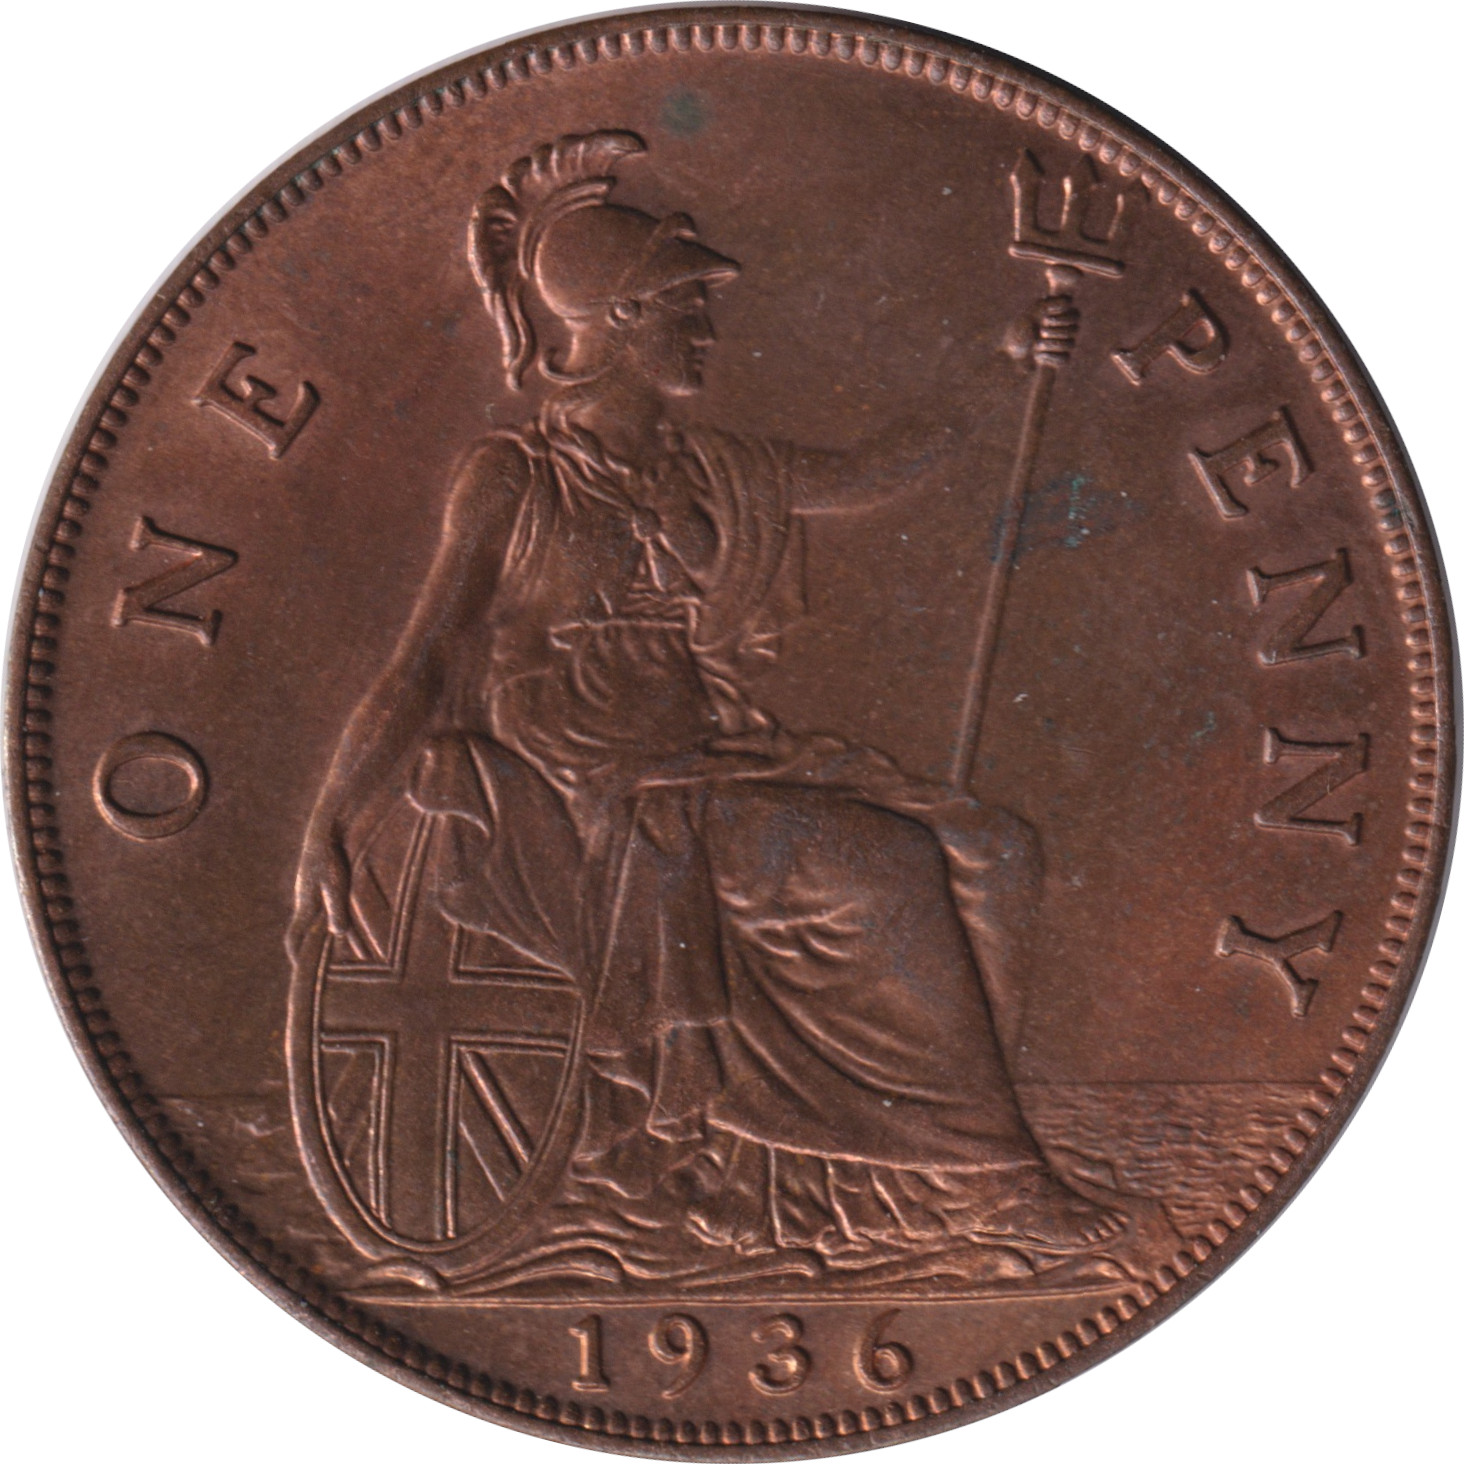 1 penny - Georges V